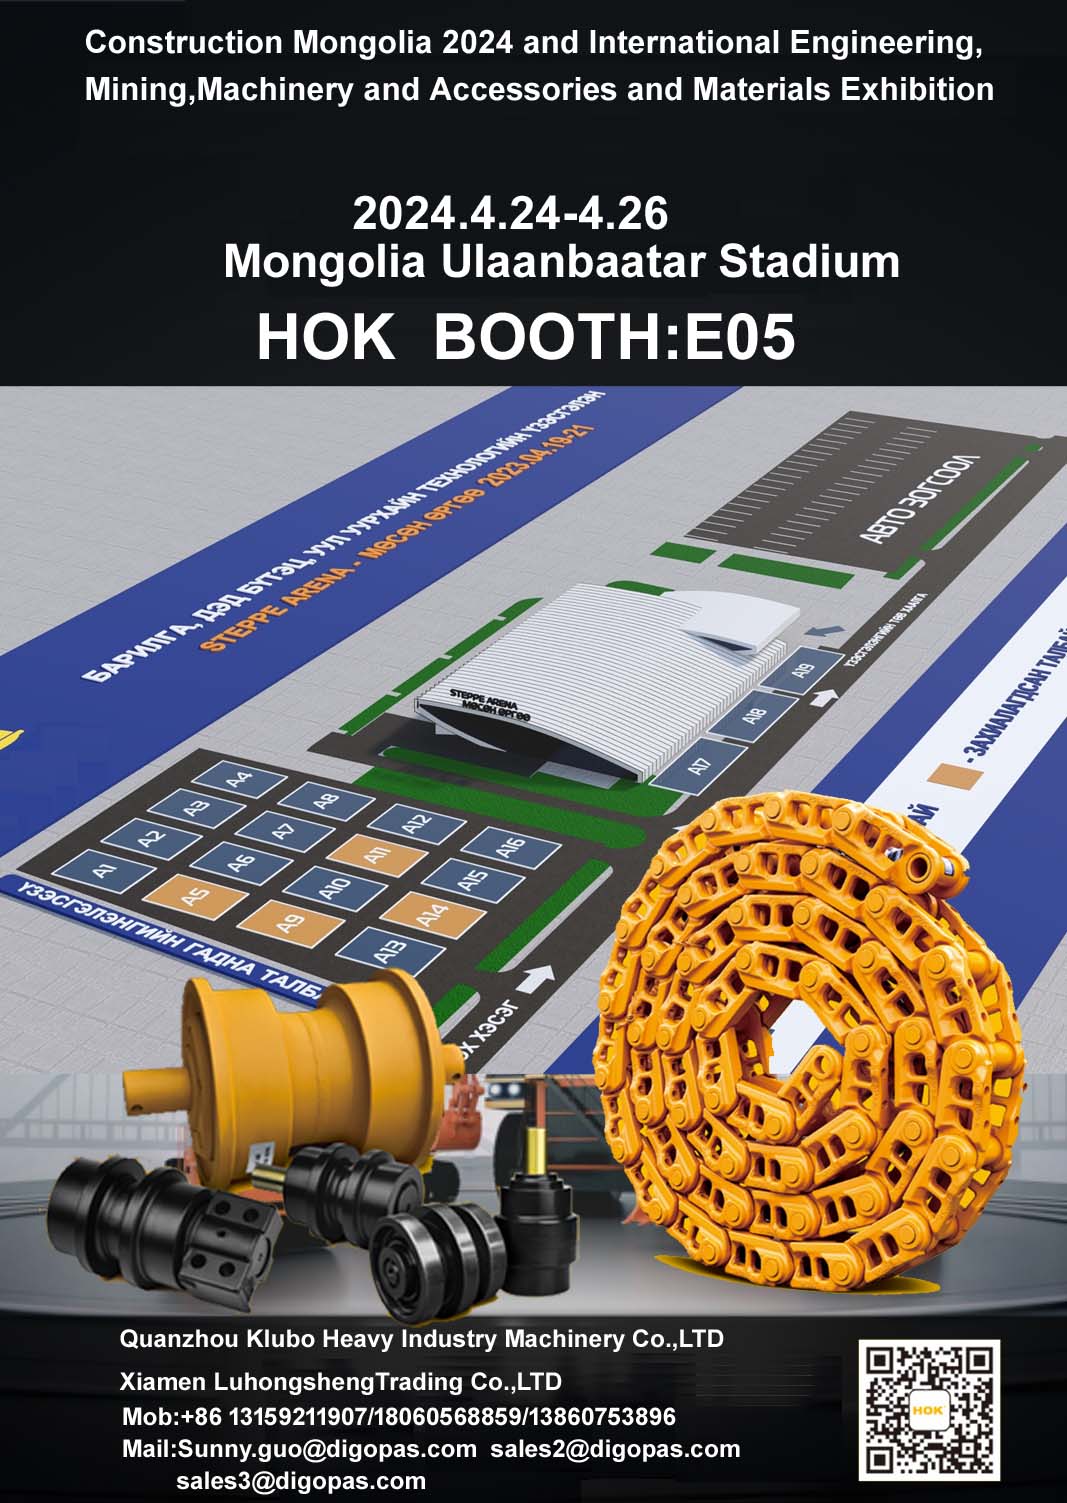 Construction Mongolia 2024 and International Engineering,Mining,Machinery and Accessories and Materials Exhibition